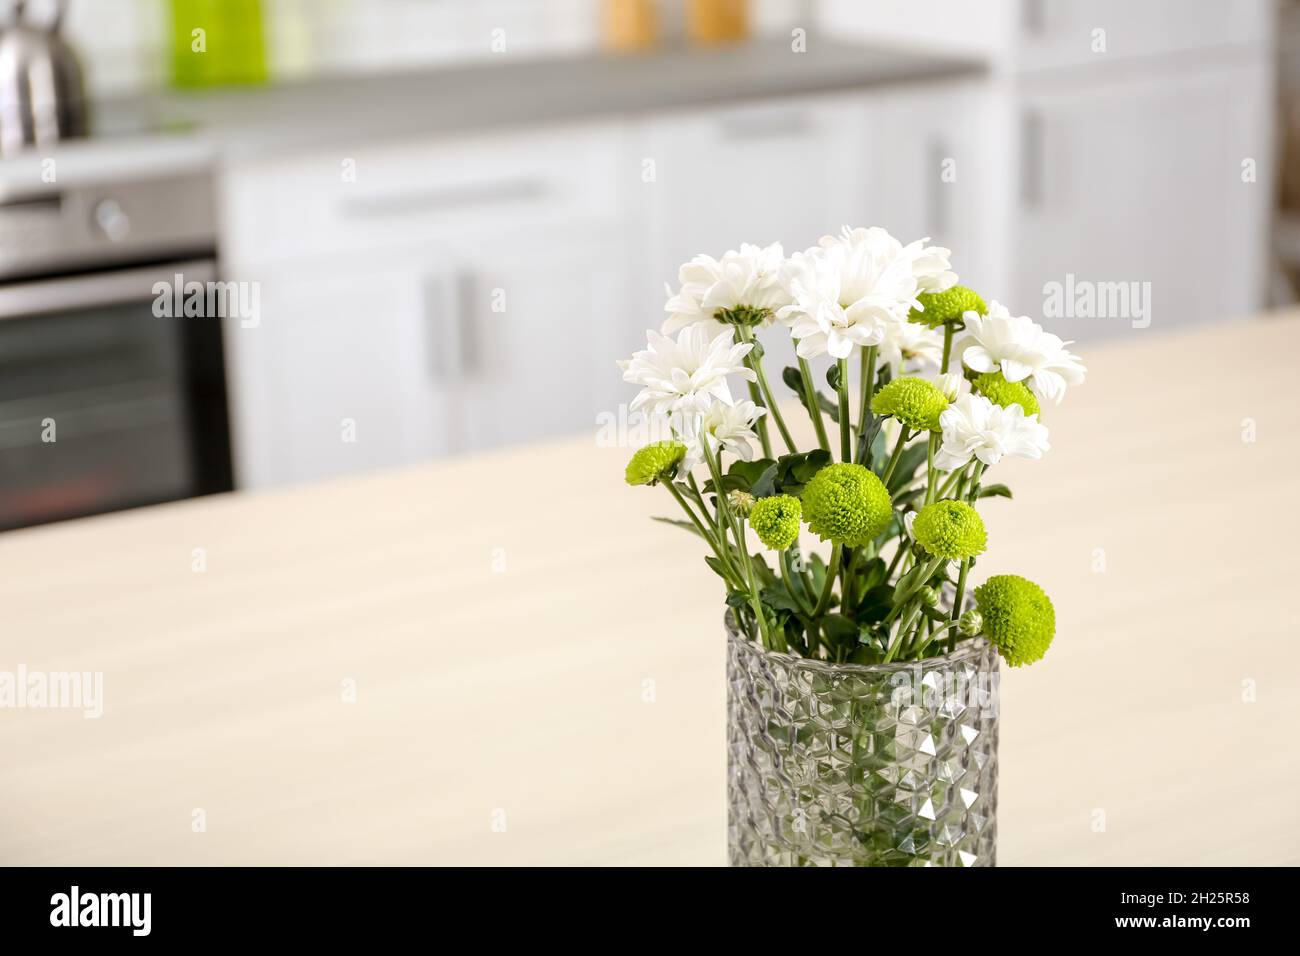 https://c8.alamy.com/comp/2H25R58/vase-with-beautiful-flowers-on-table-in-kitchen-interior-space-for-text-2H25R58.jpg